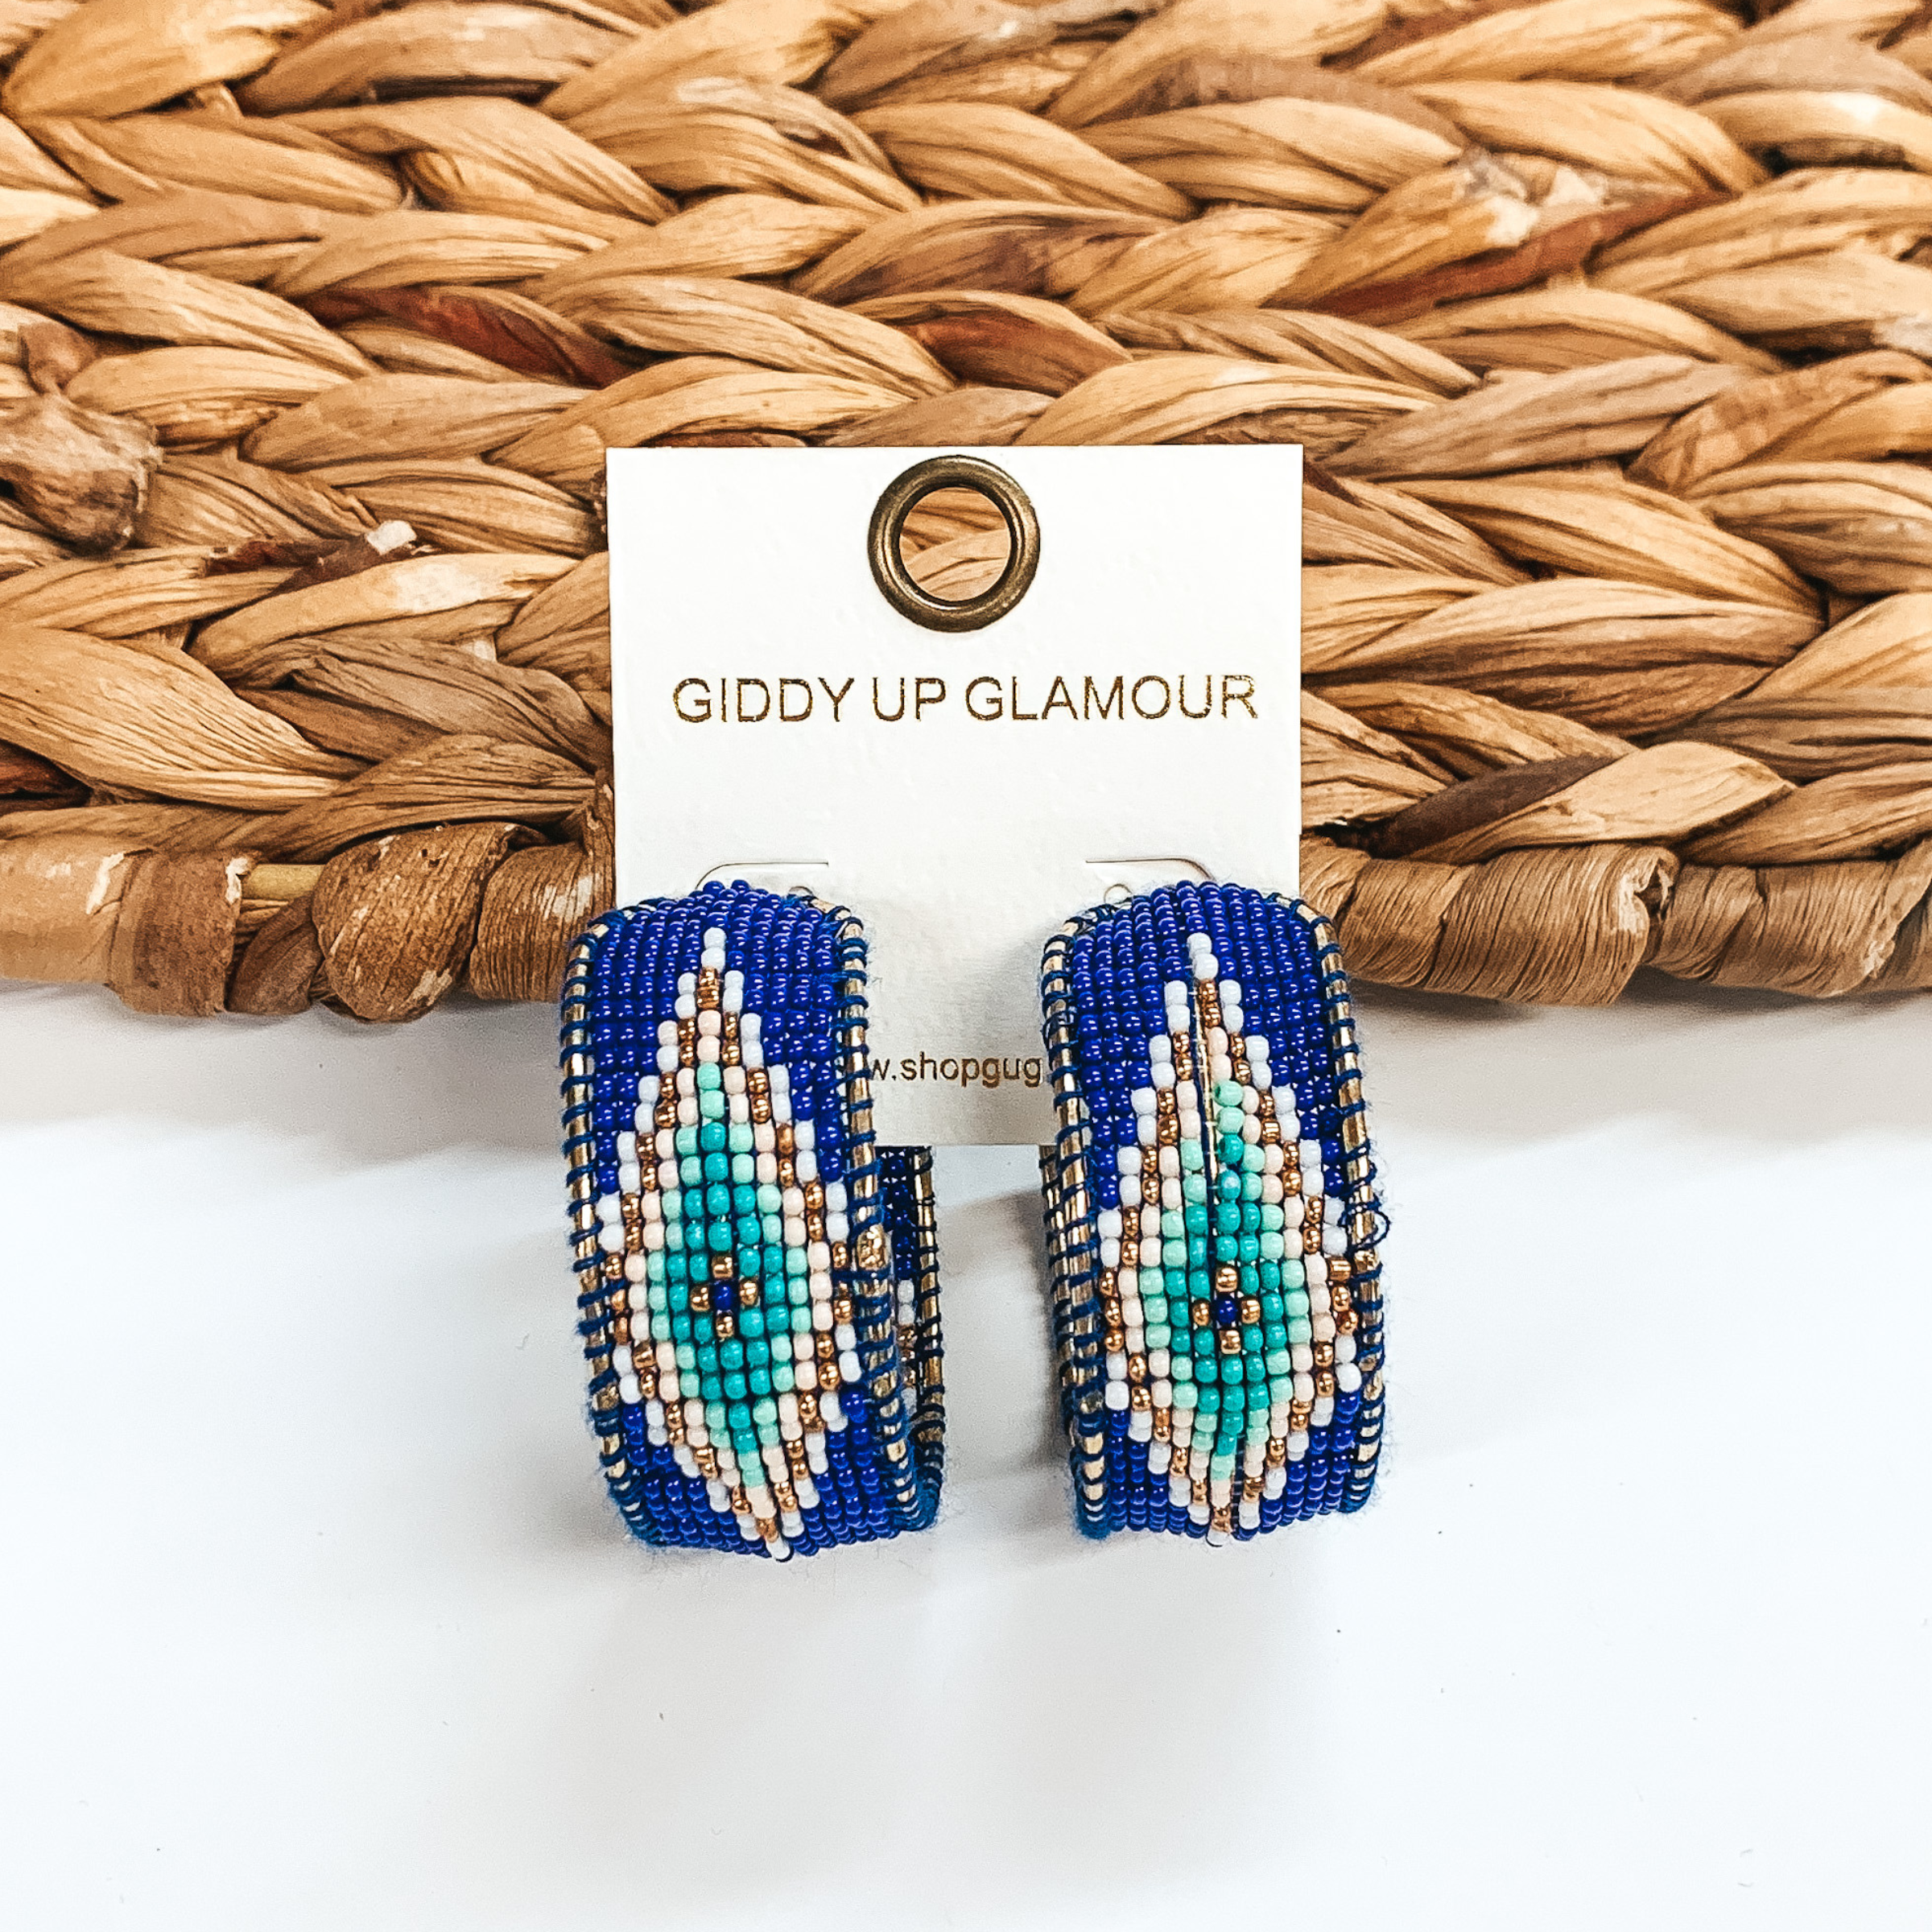 These beaded hoop earrings are mainly royal blue color with an Aztec pattern of white, light blue, and gold. These earrings are pictured on a white card holder in front of a basket weave material on a white background. 